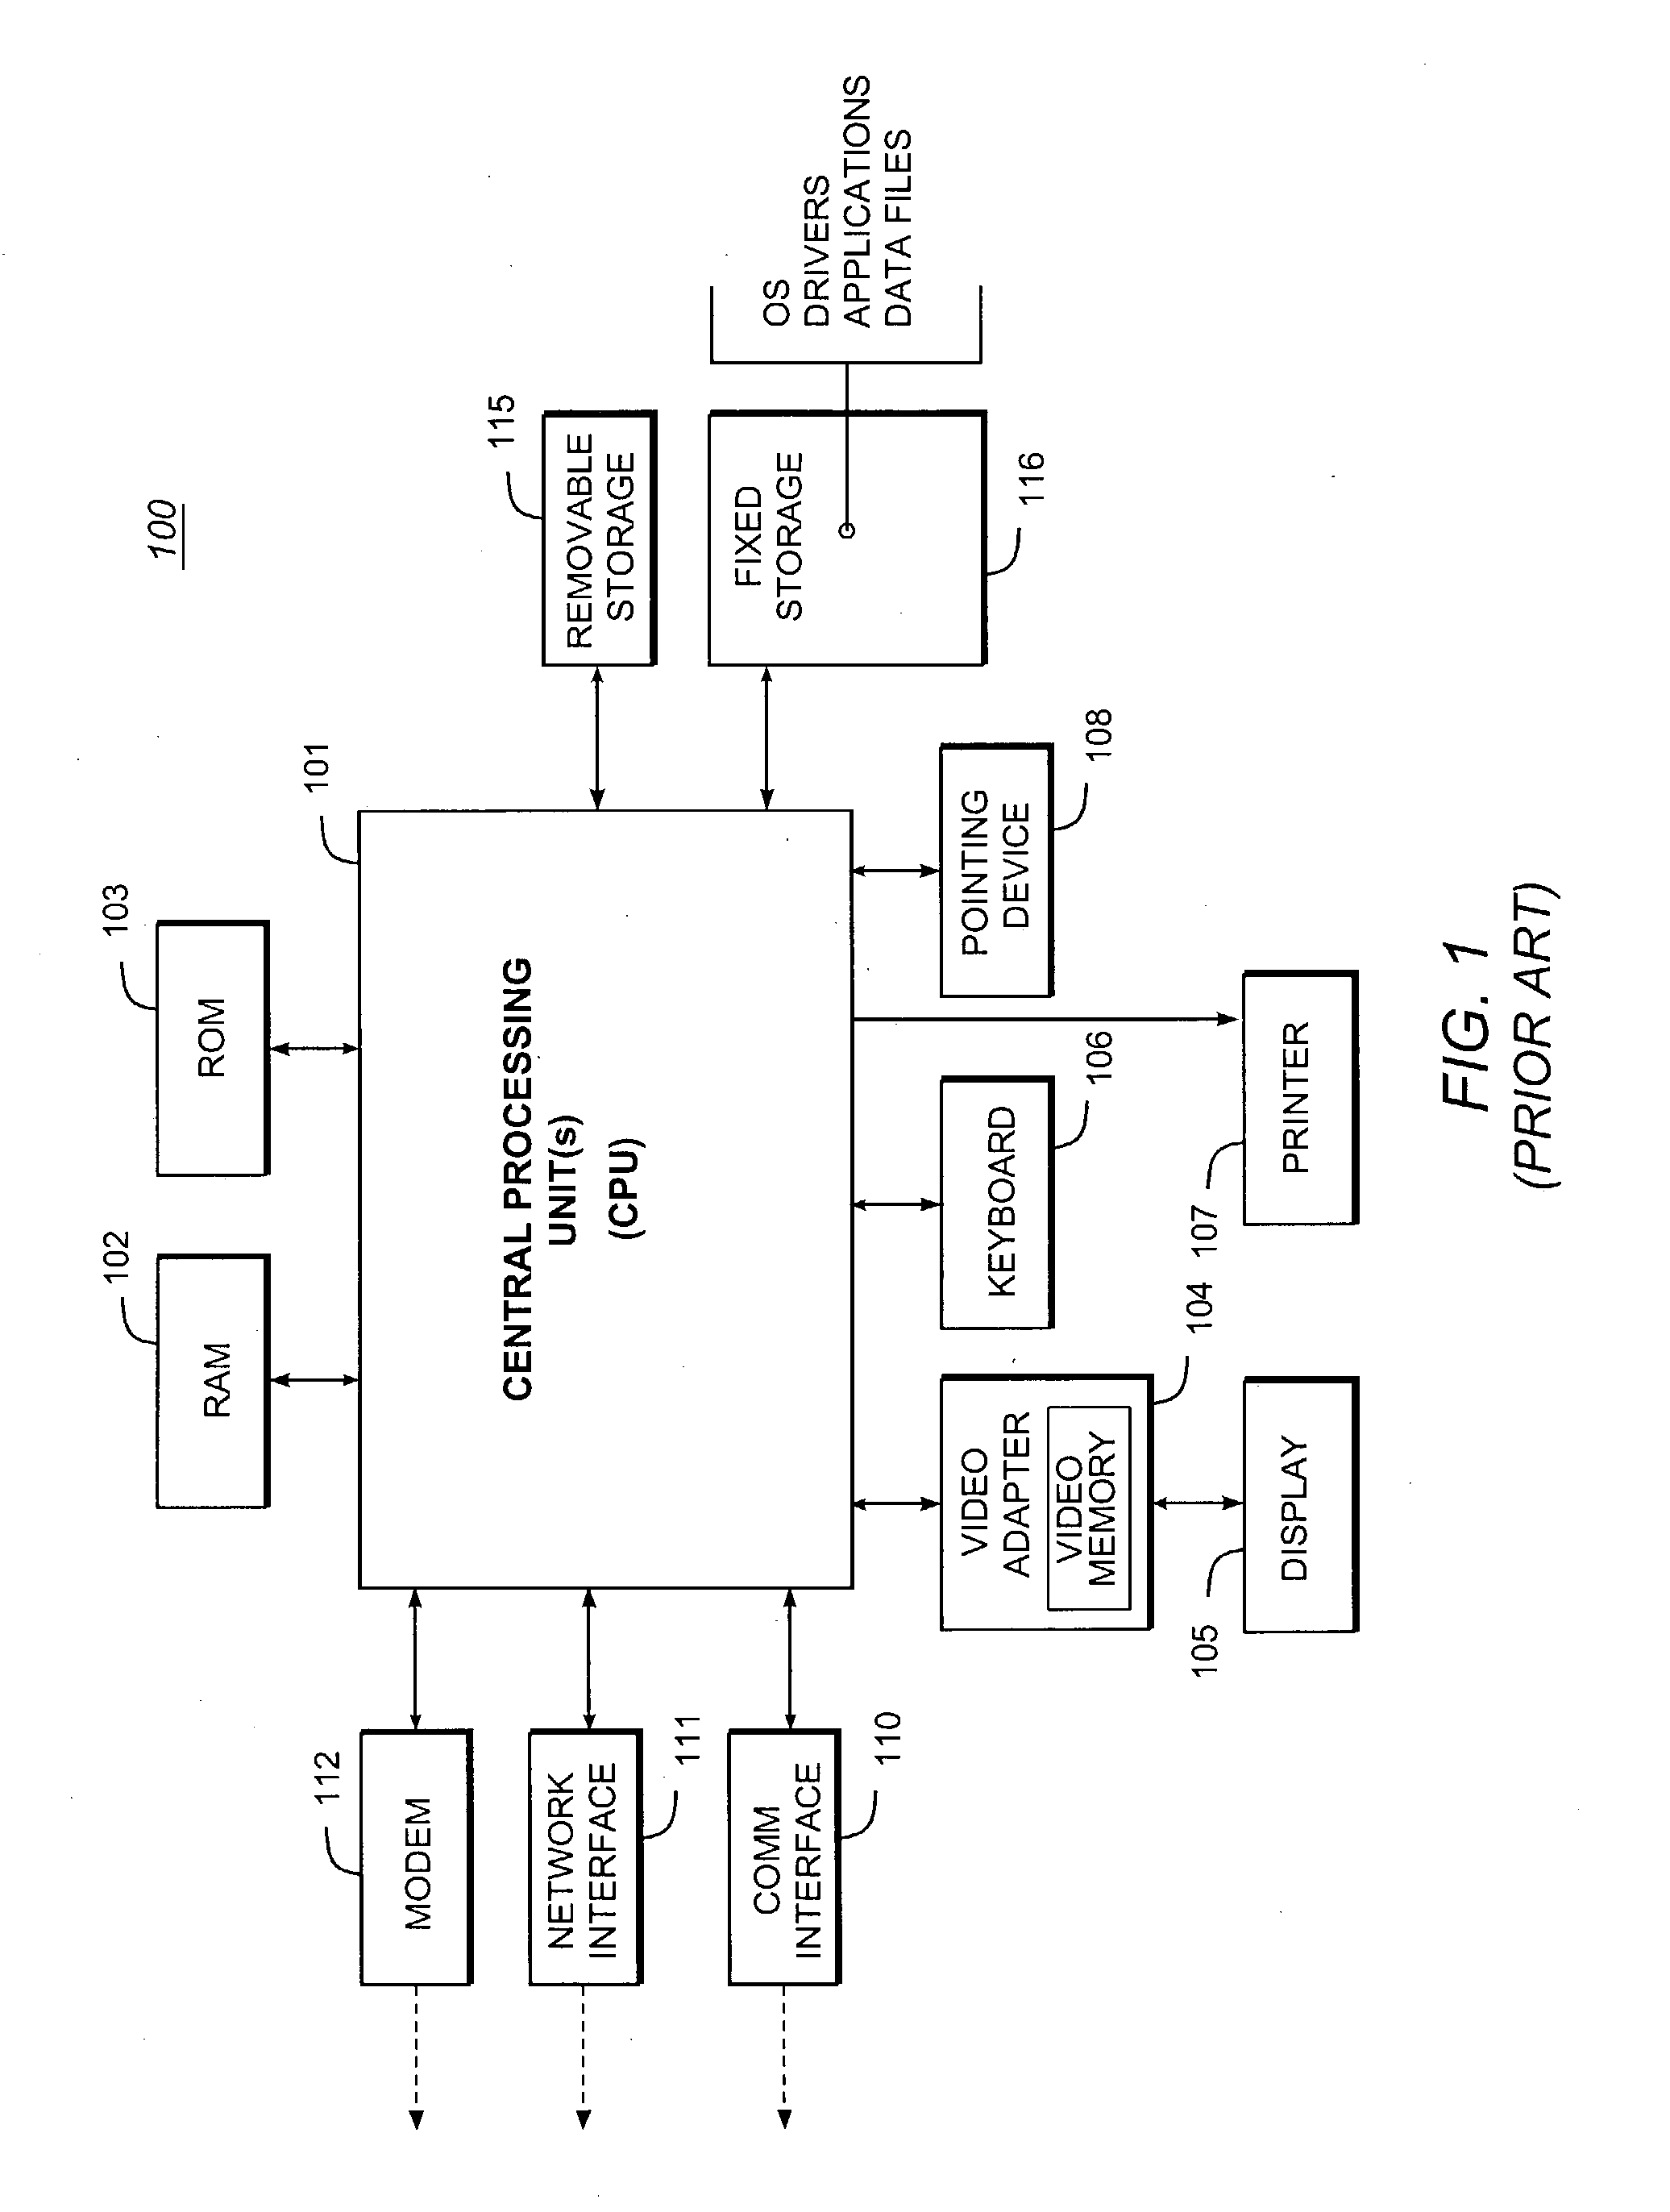 System and methodology for providing compact B-Tree